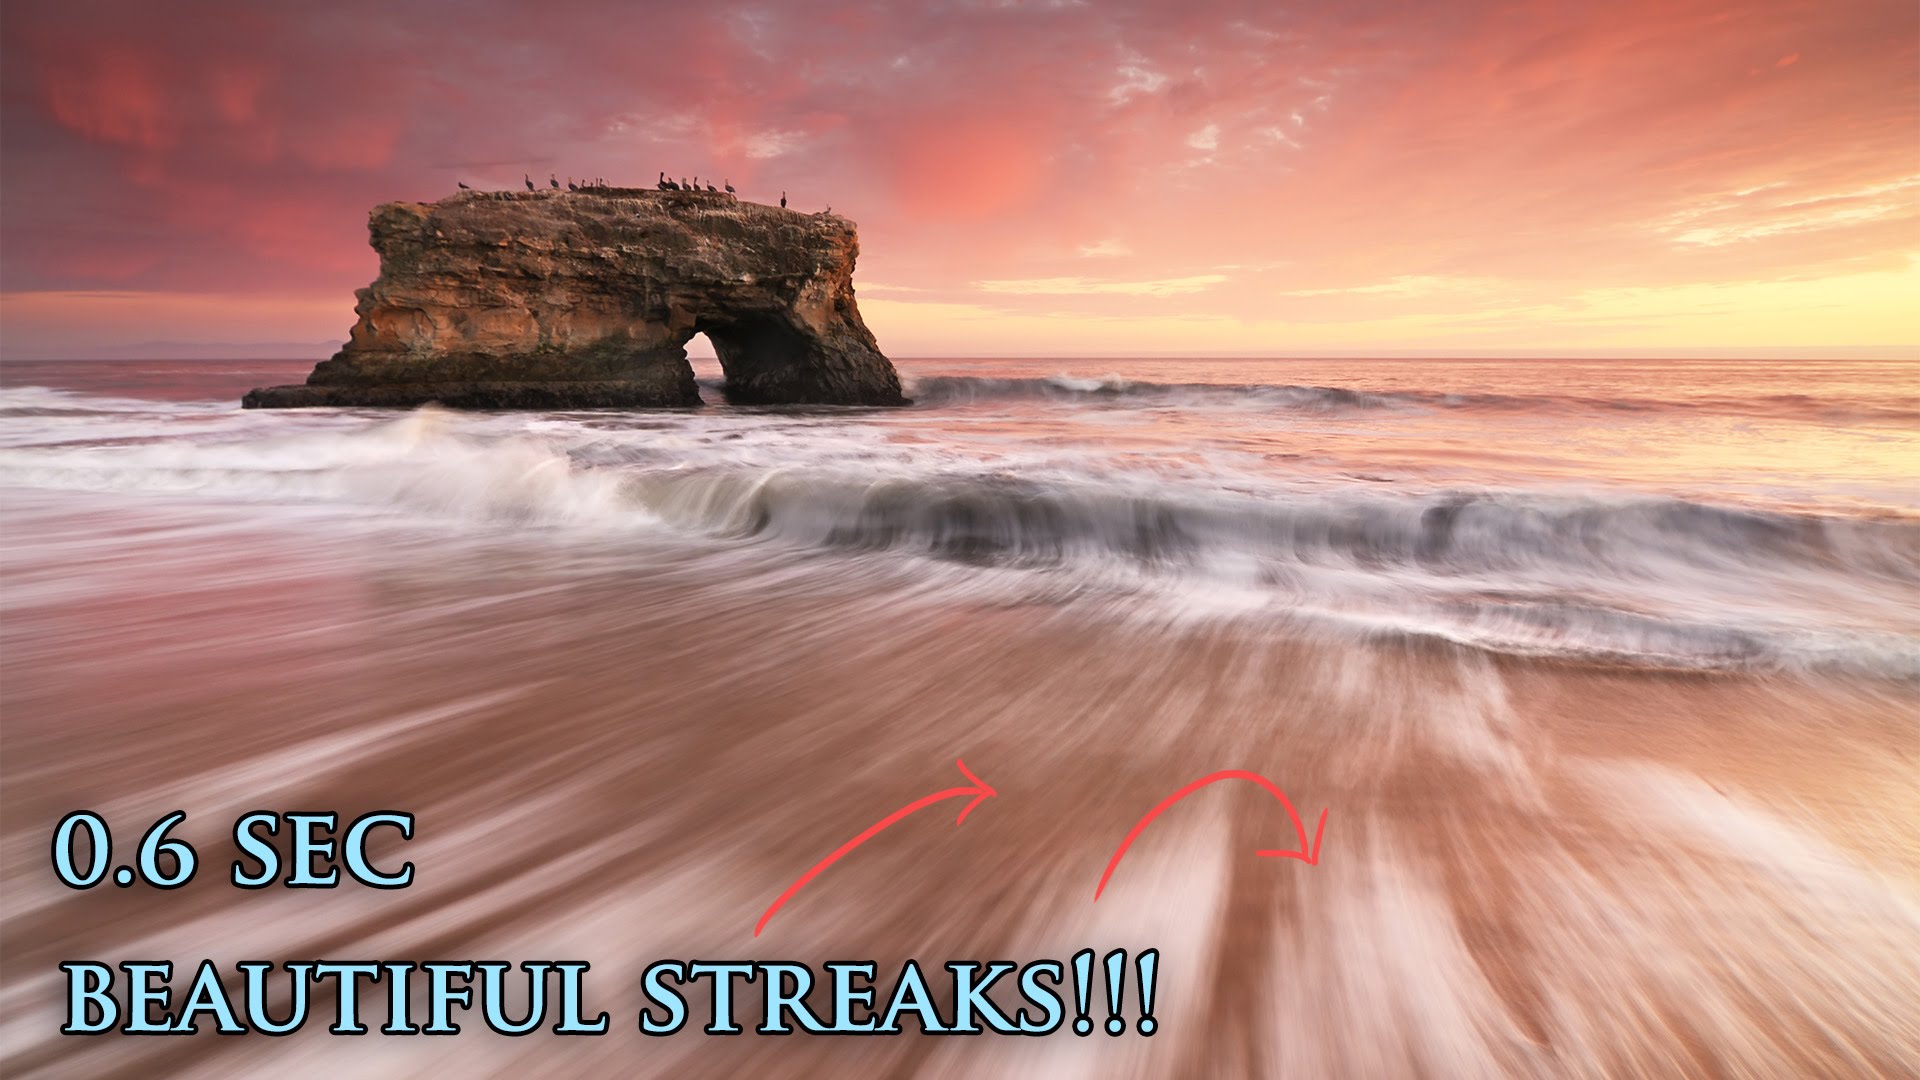 Create Long Exposure Streaks When Photographing Waves at the Ocean ...